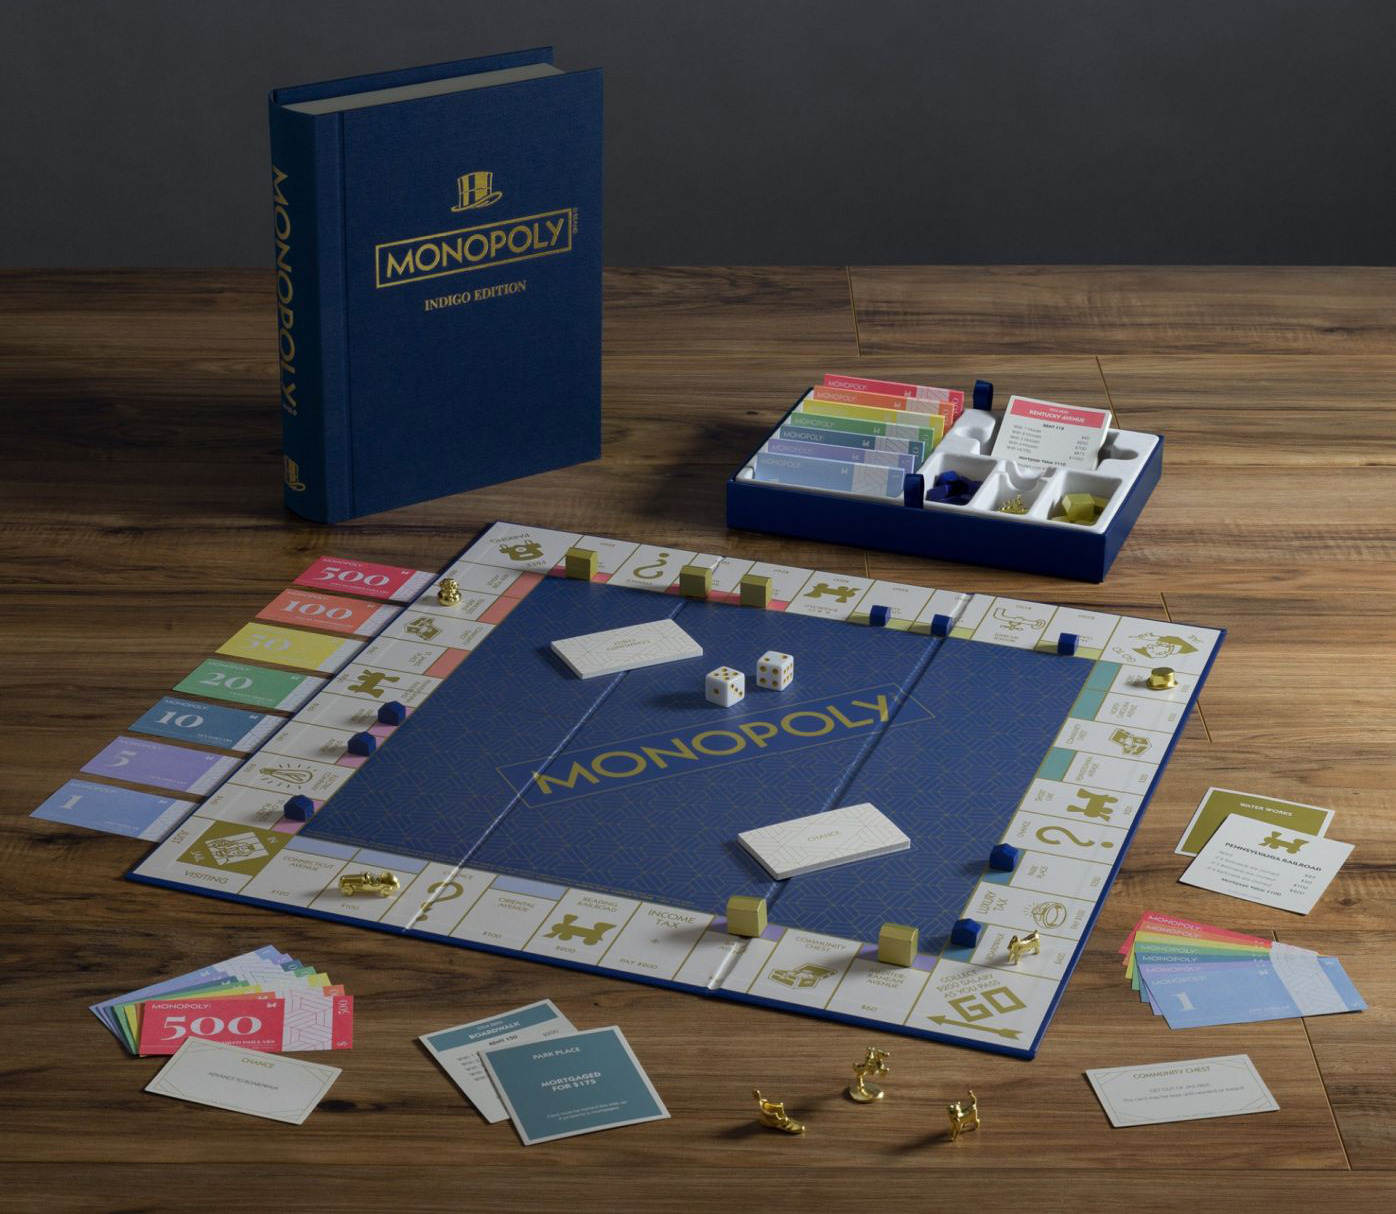 Classic Board Games Get a Stylish Upgrade from WS Game Co. - The